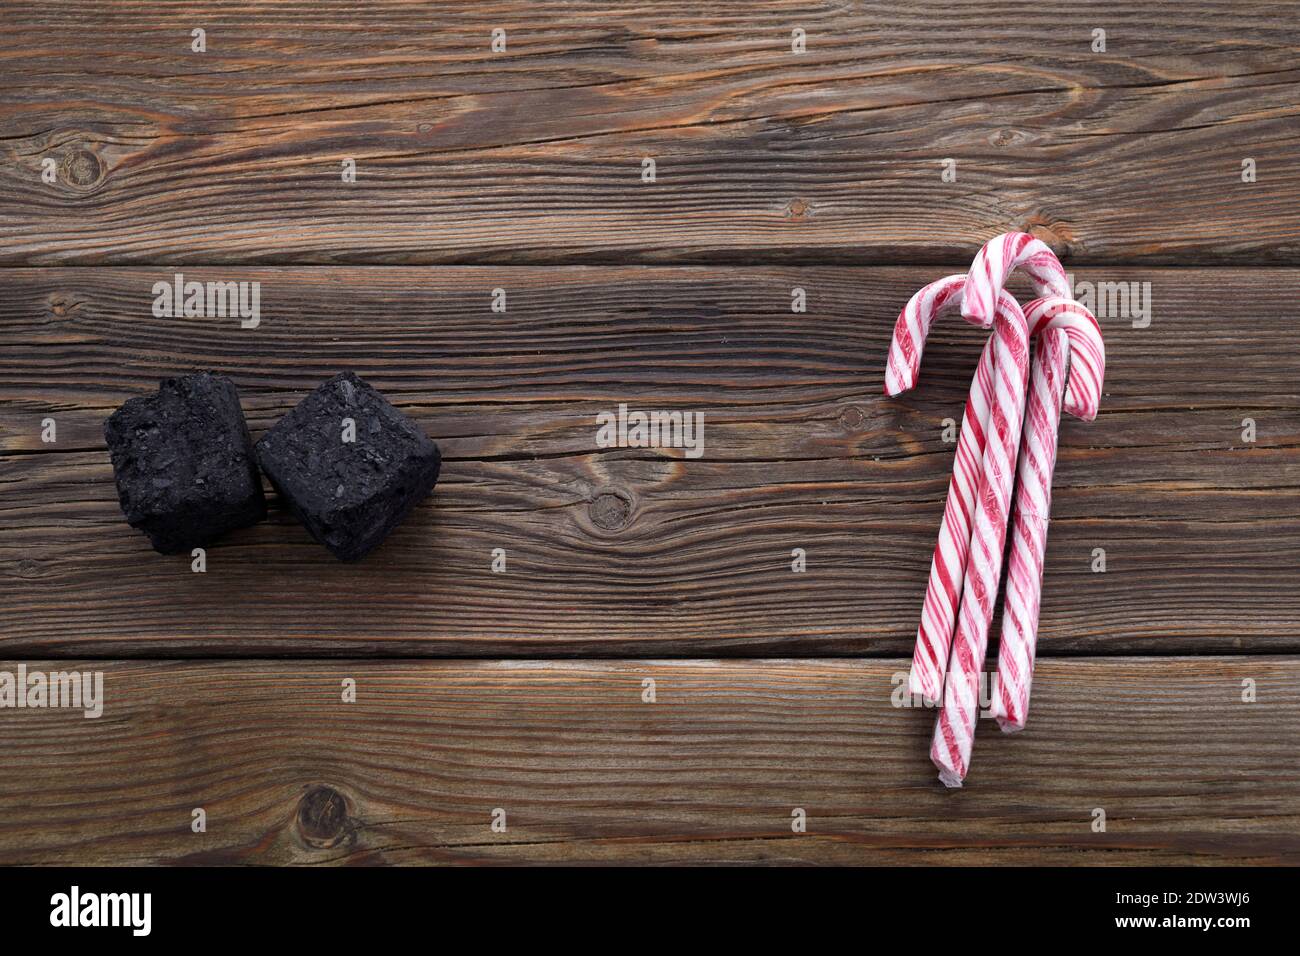 Christmas coal for bad kids ant candys or gift for good children. Christmas tradition in many countries. Stock Photo